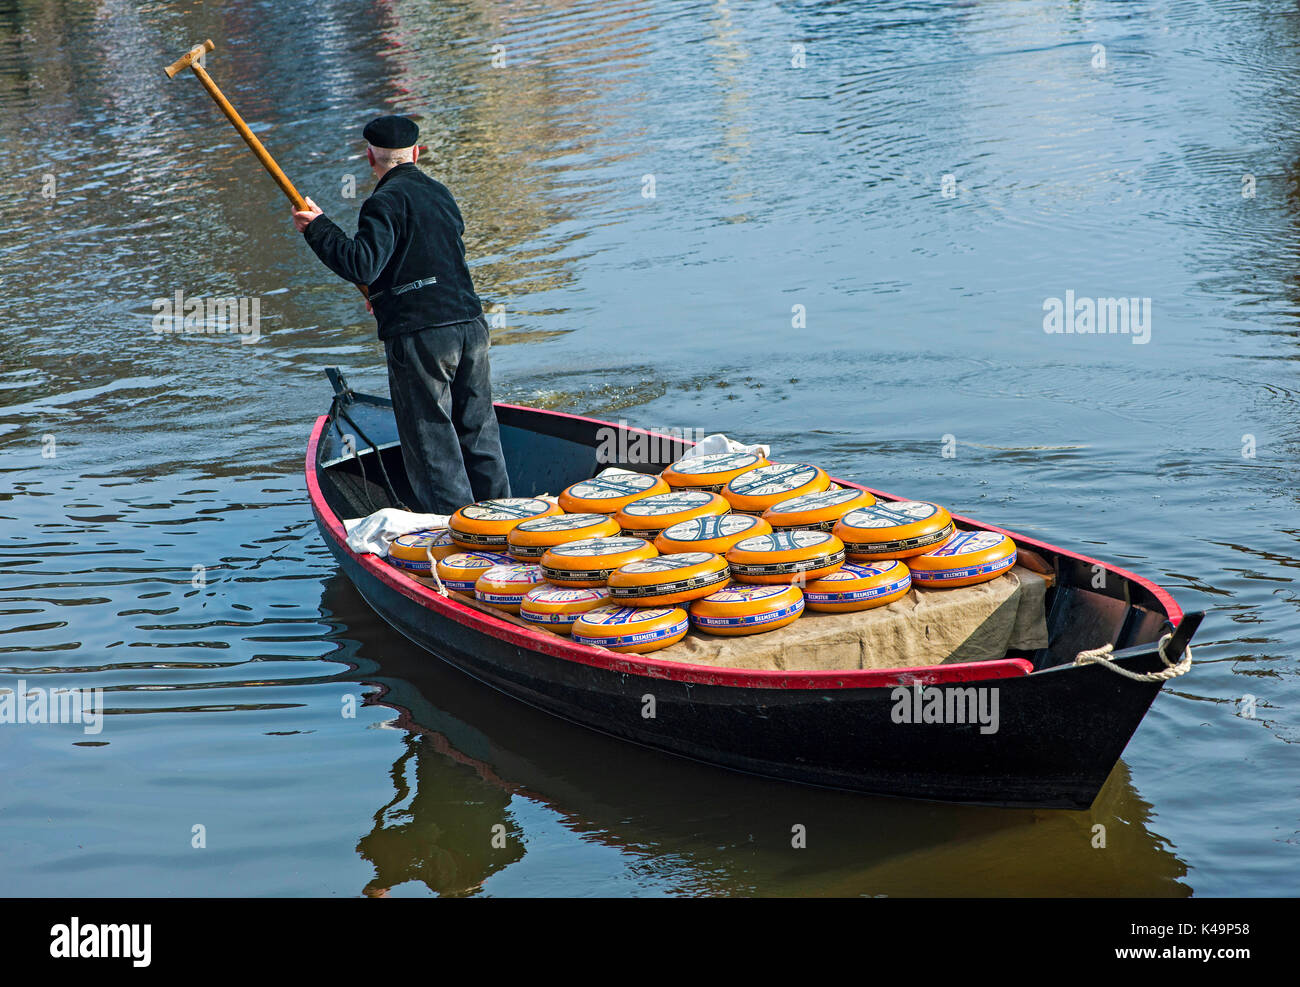 Transport Of Beemster Cheese In A Boat With Coxswain On A Canal, Alkmaar, Netherlands Stock Photo